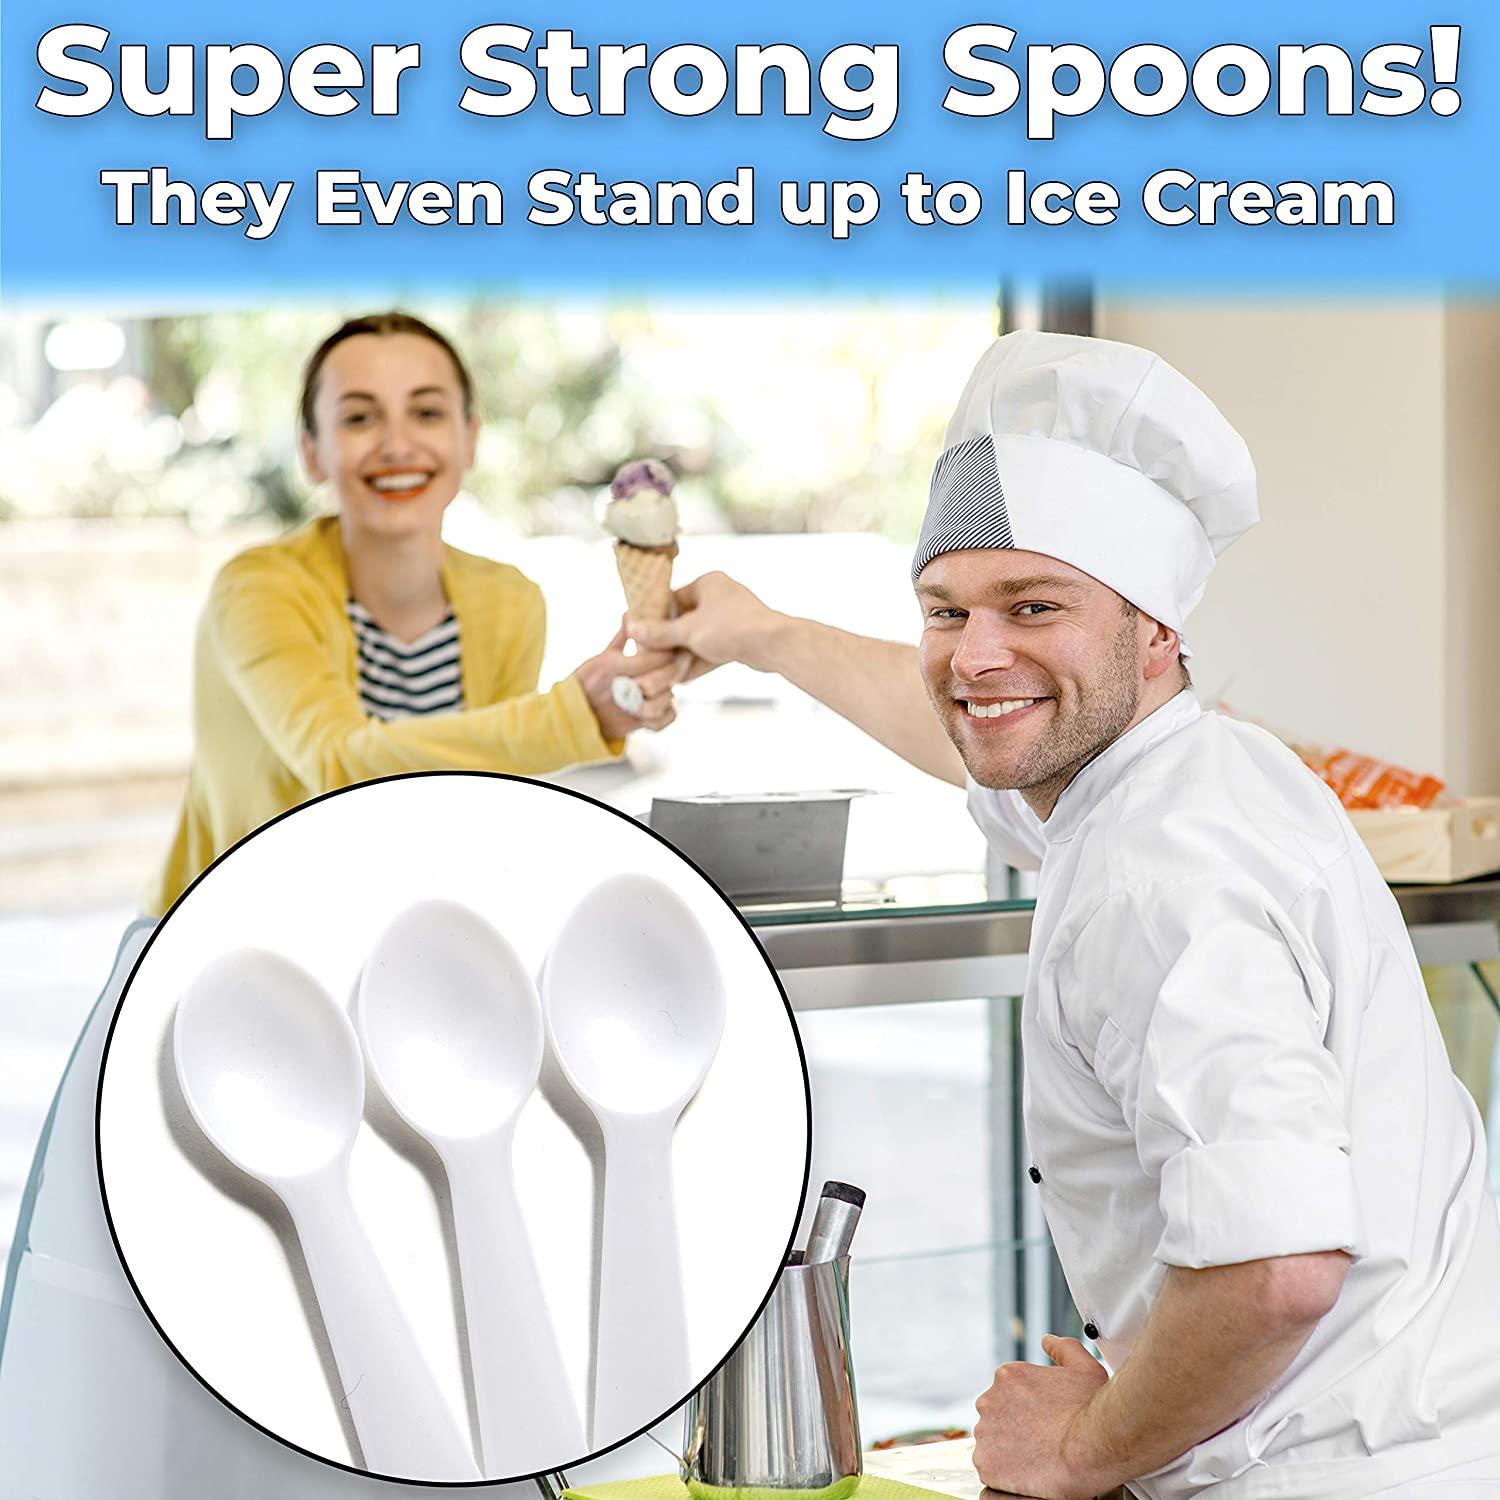 Extra Sturdy, BPA Free 100ct Plastic Tasting Spoons. Disposable Mini  Tasters for Sampling or Individual Portions of Ice Cream, and Appetizers.  Great for Food Trucks, Parties and Events Classic White 100